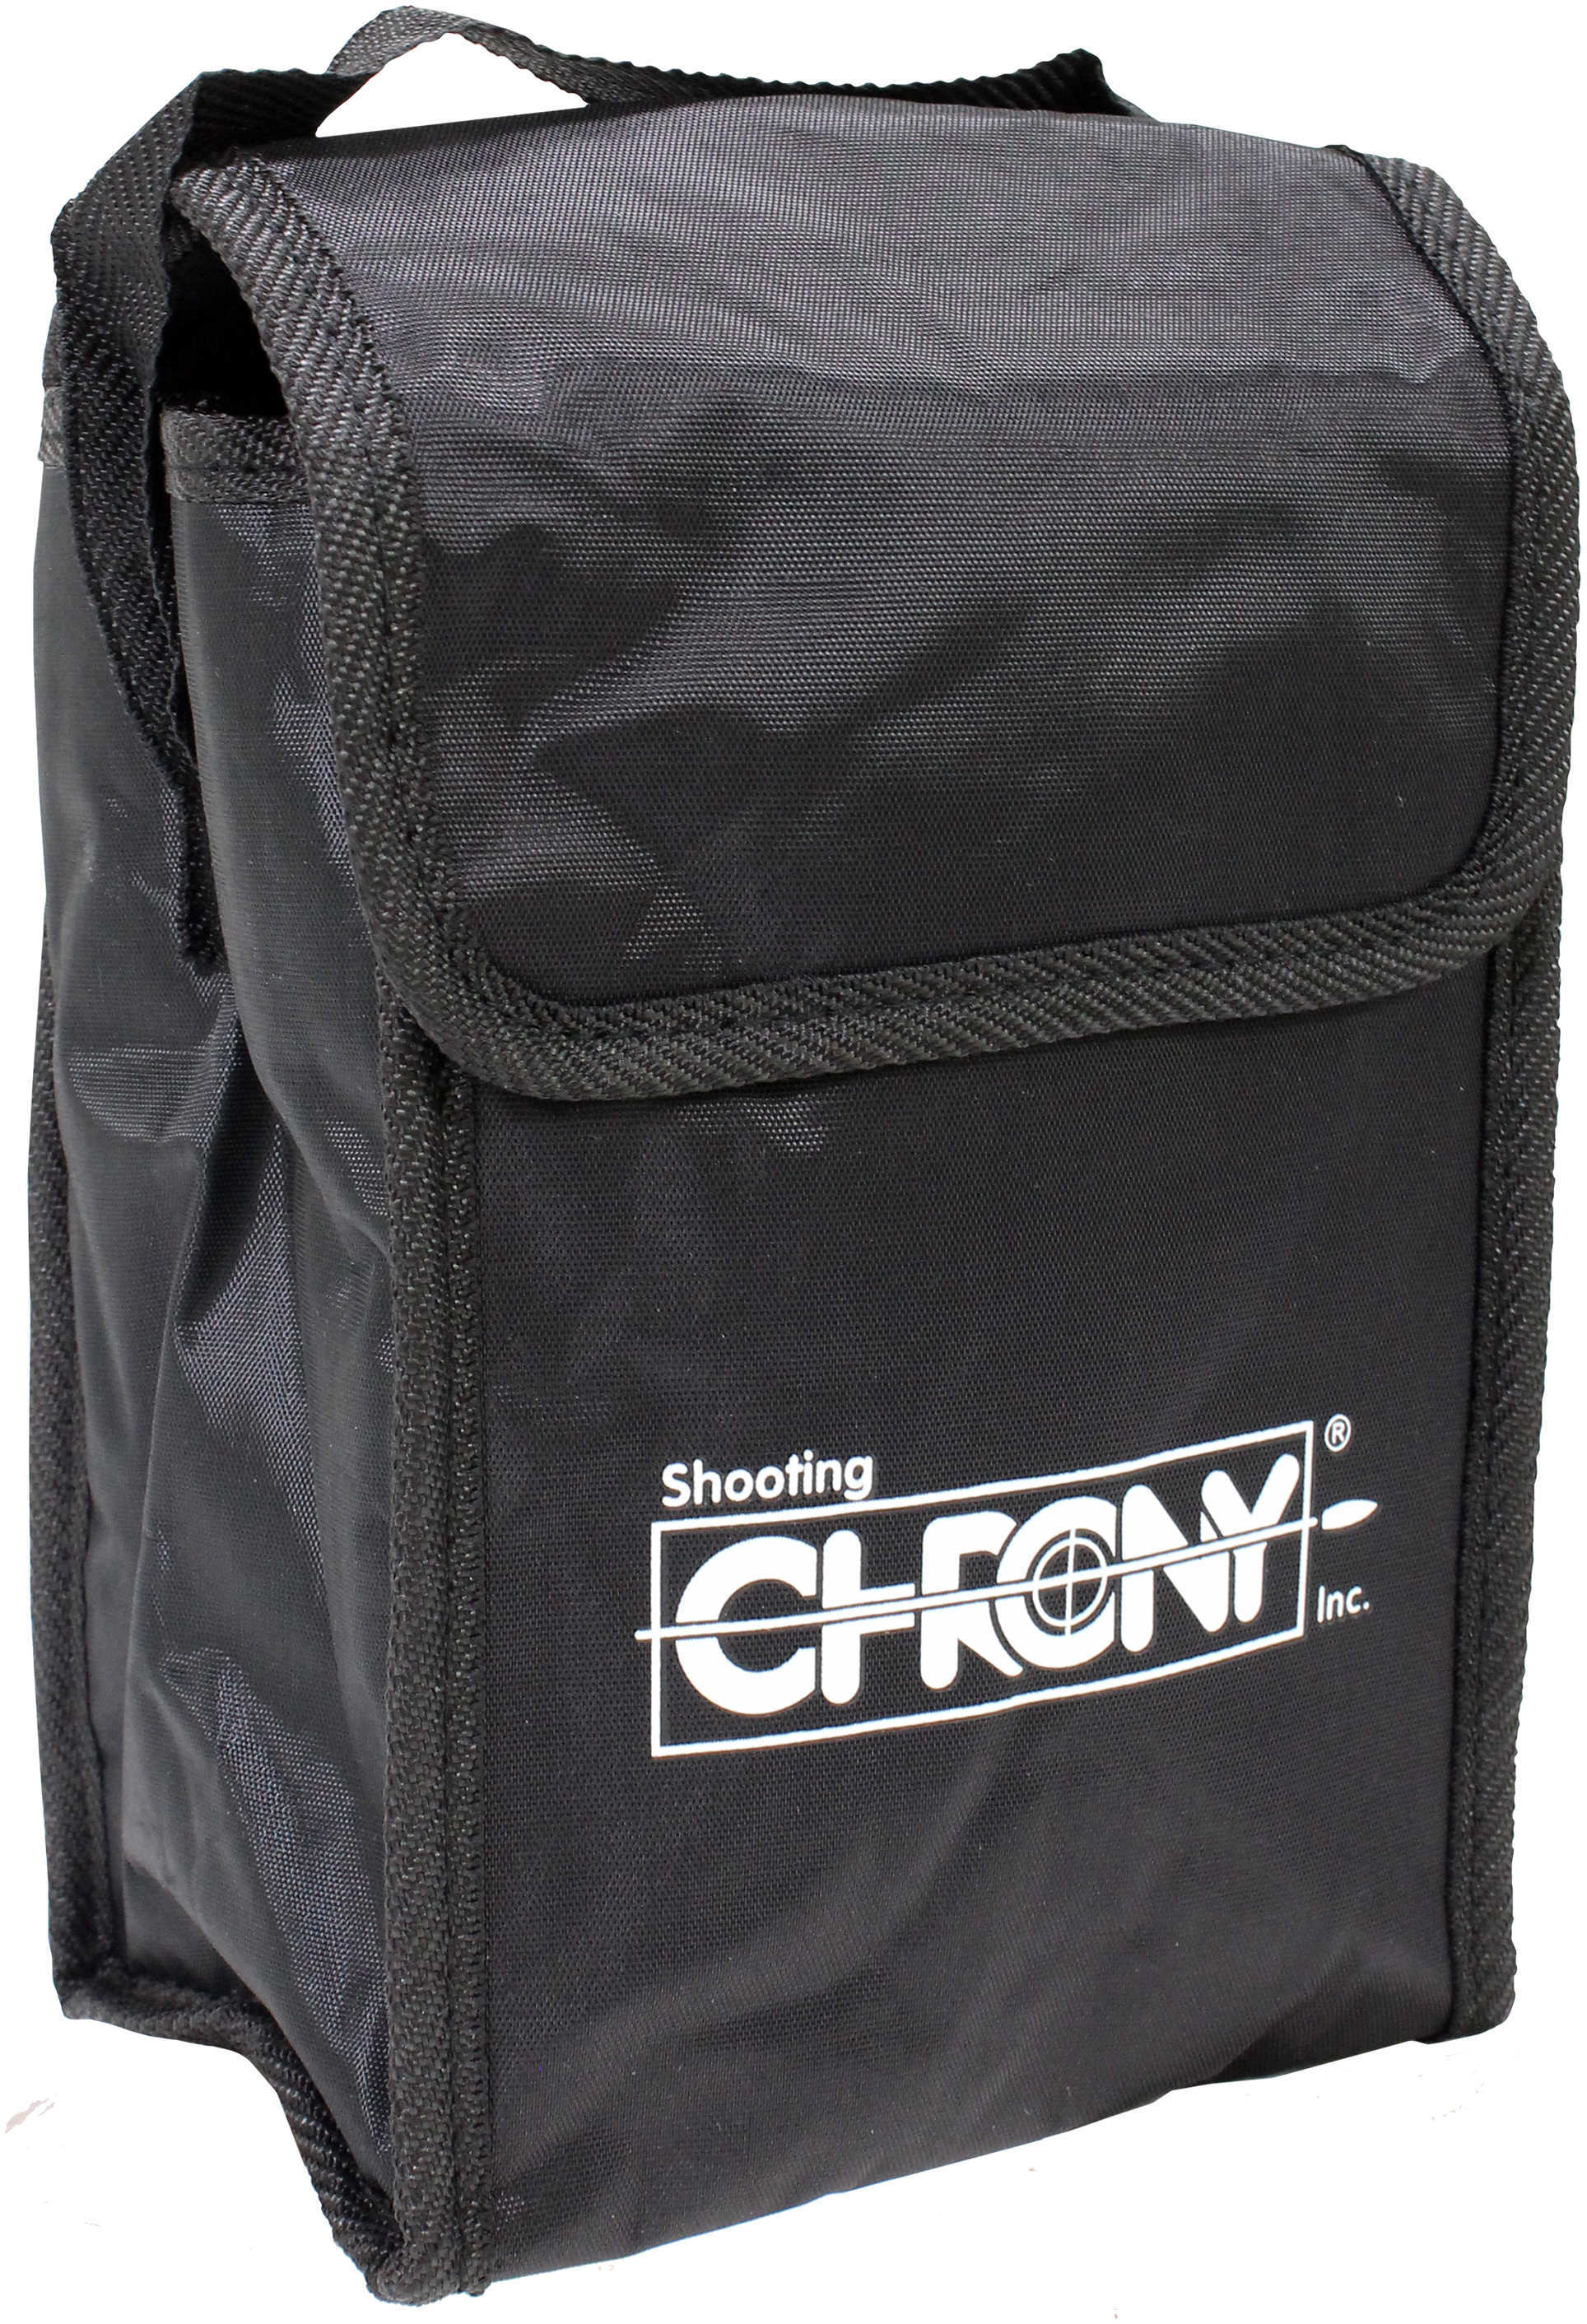 Chrony Carrying Case (For and Printer)